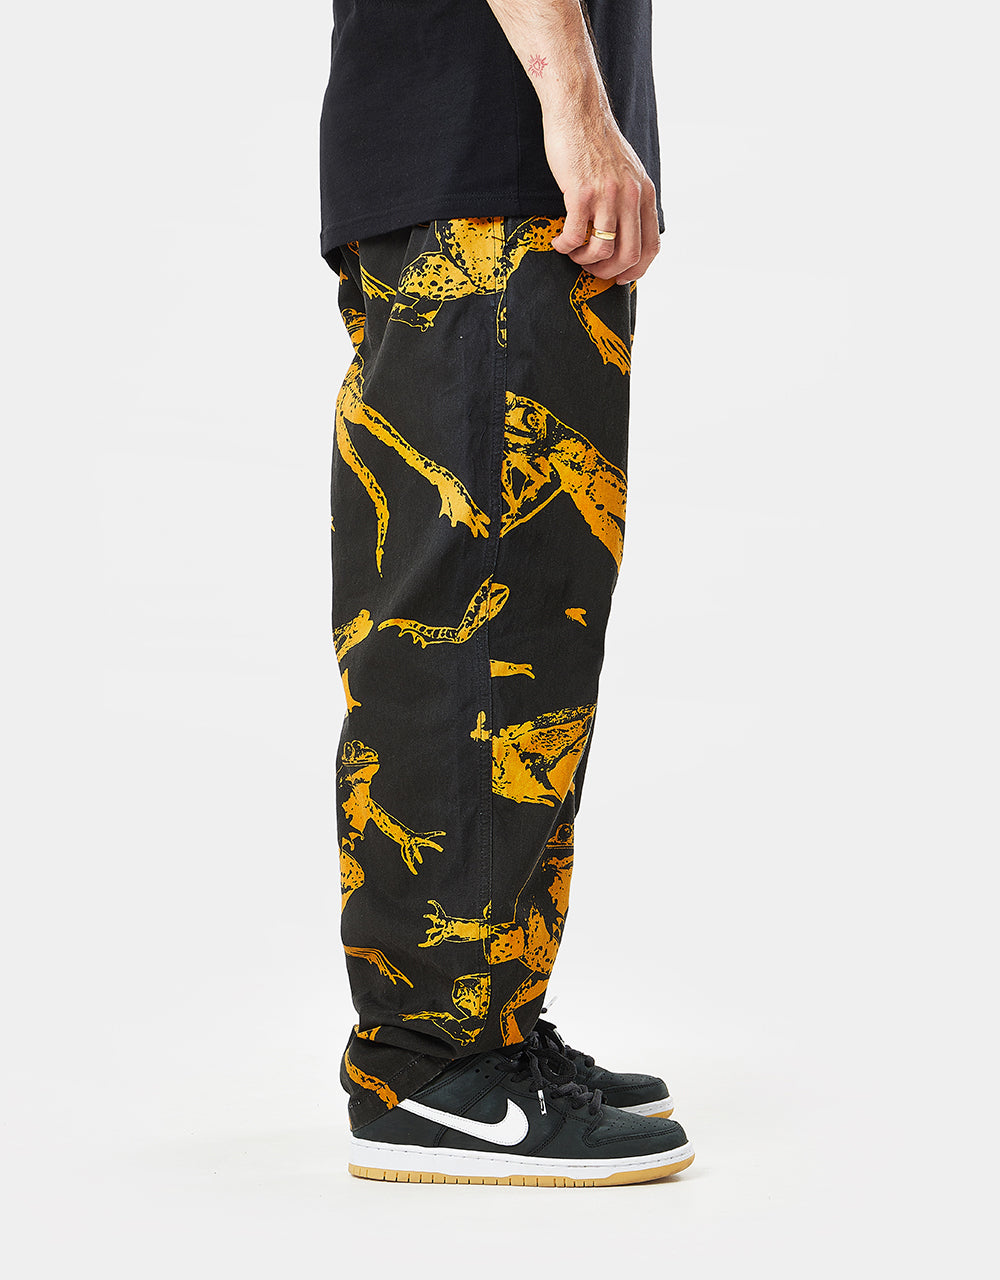 Route One Organic Baggy Pants - Leap Black/Rust